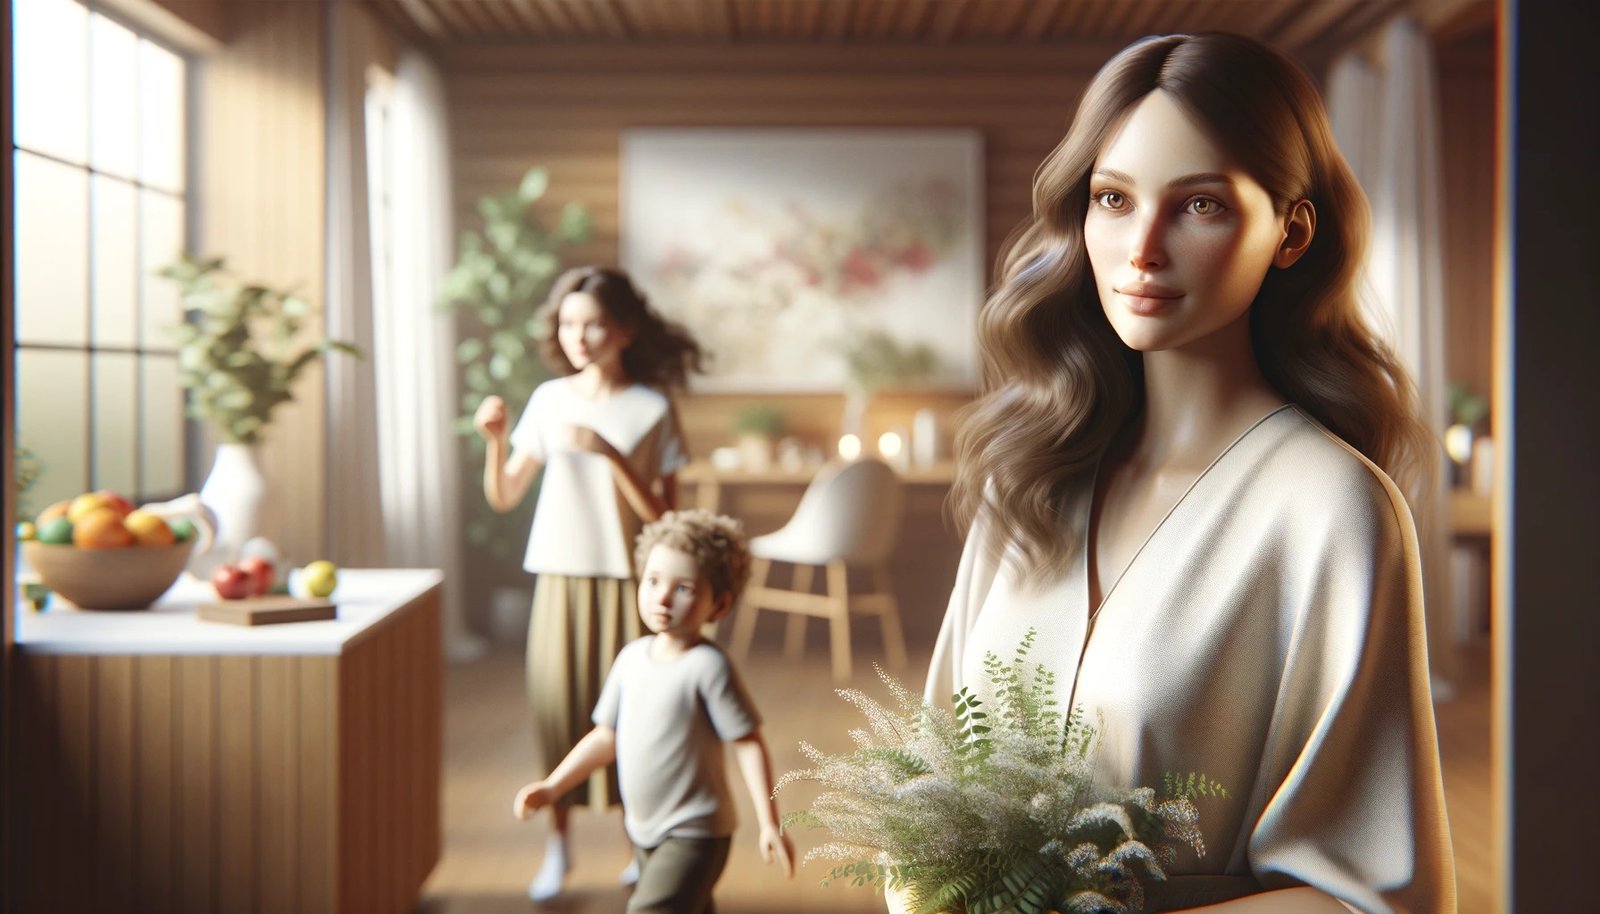 A feminine woman holding a small bouquet with two children visible in the background.